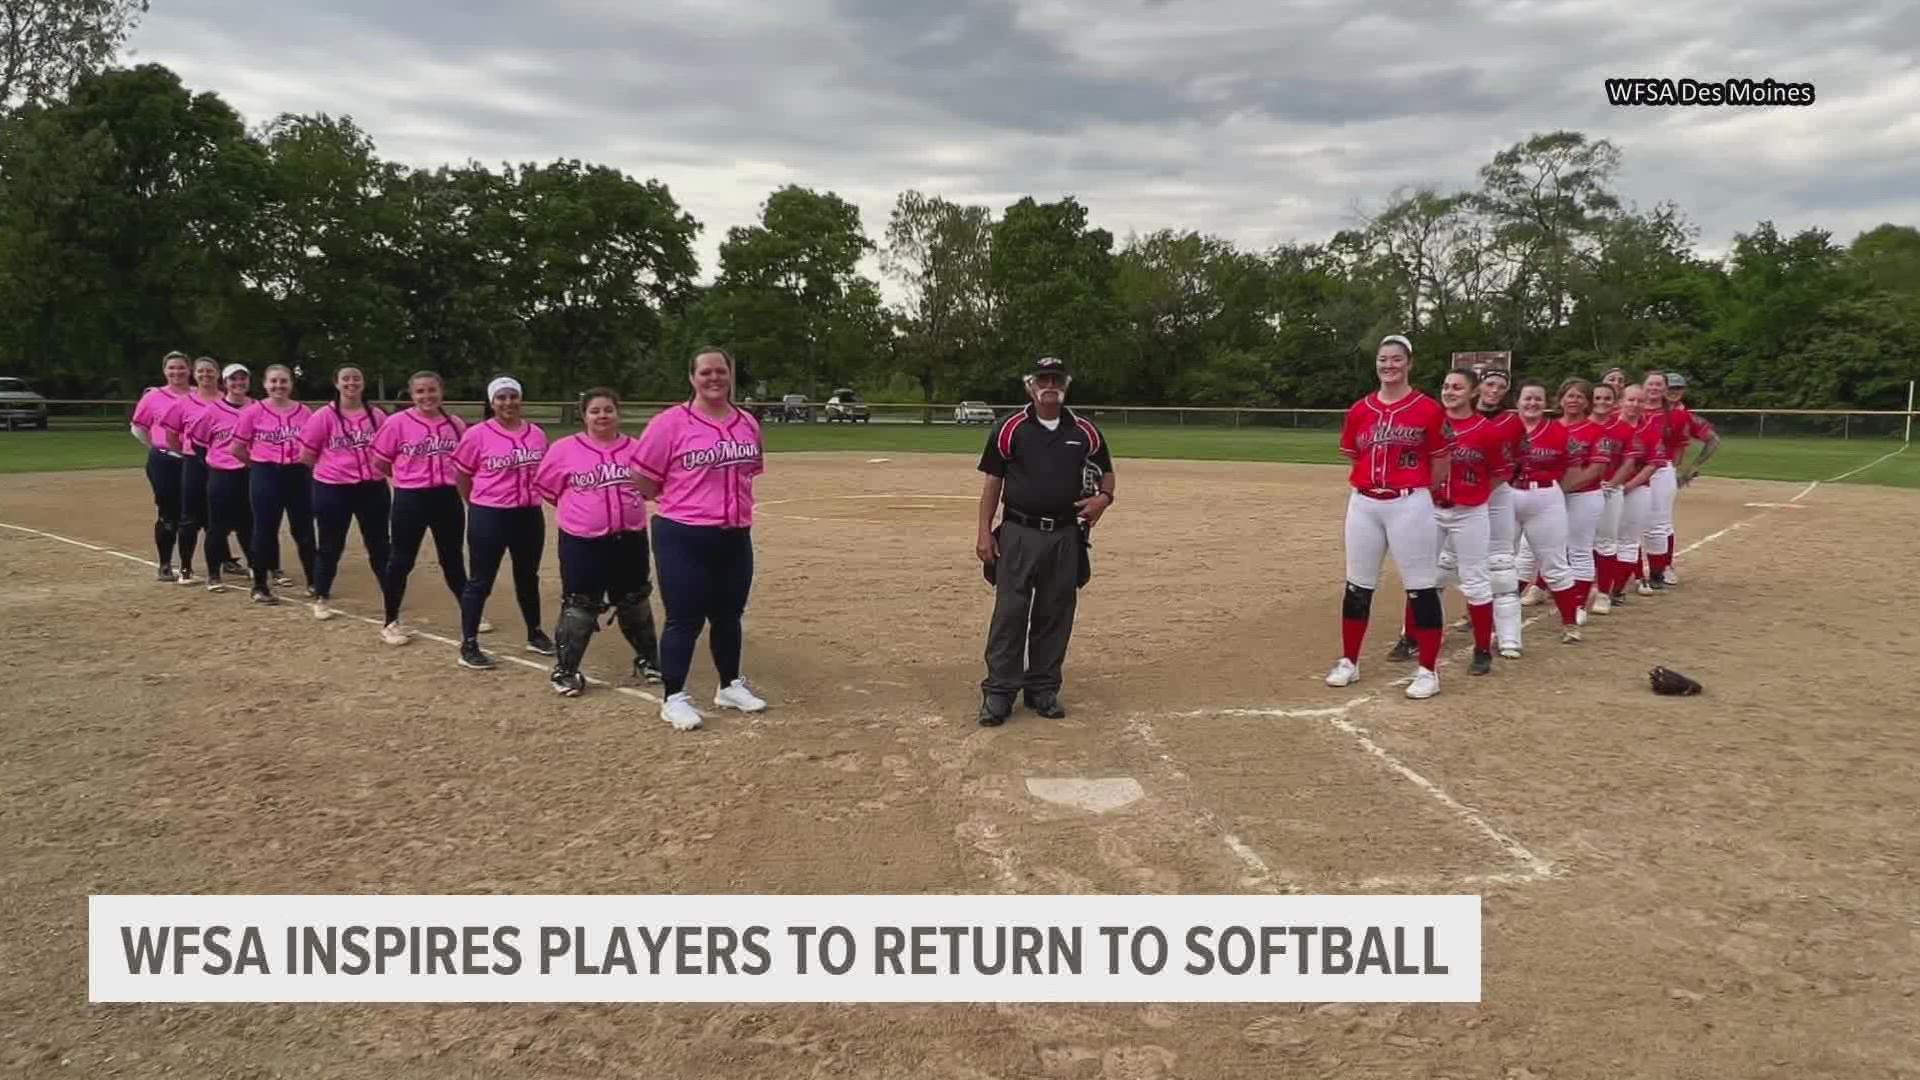 Besides college ball and playing professionally, there aren't many other opportunities
for women who want to continue playing competitive softball.